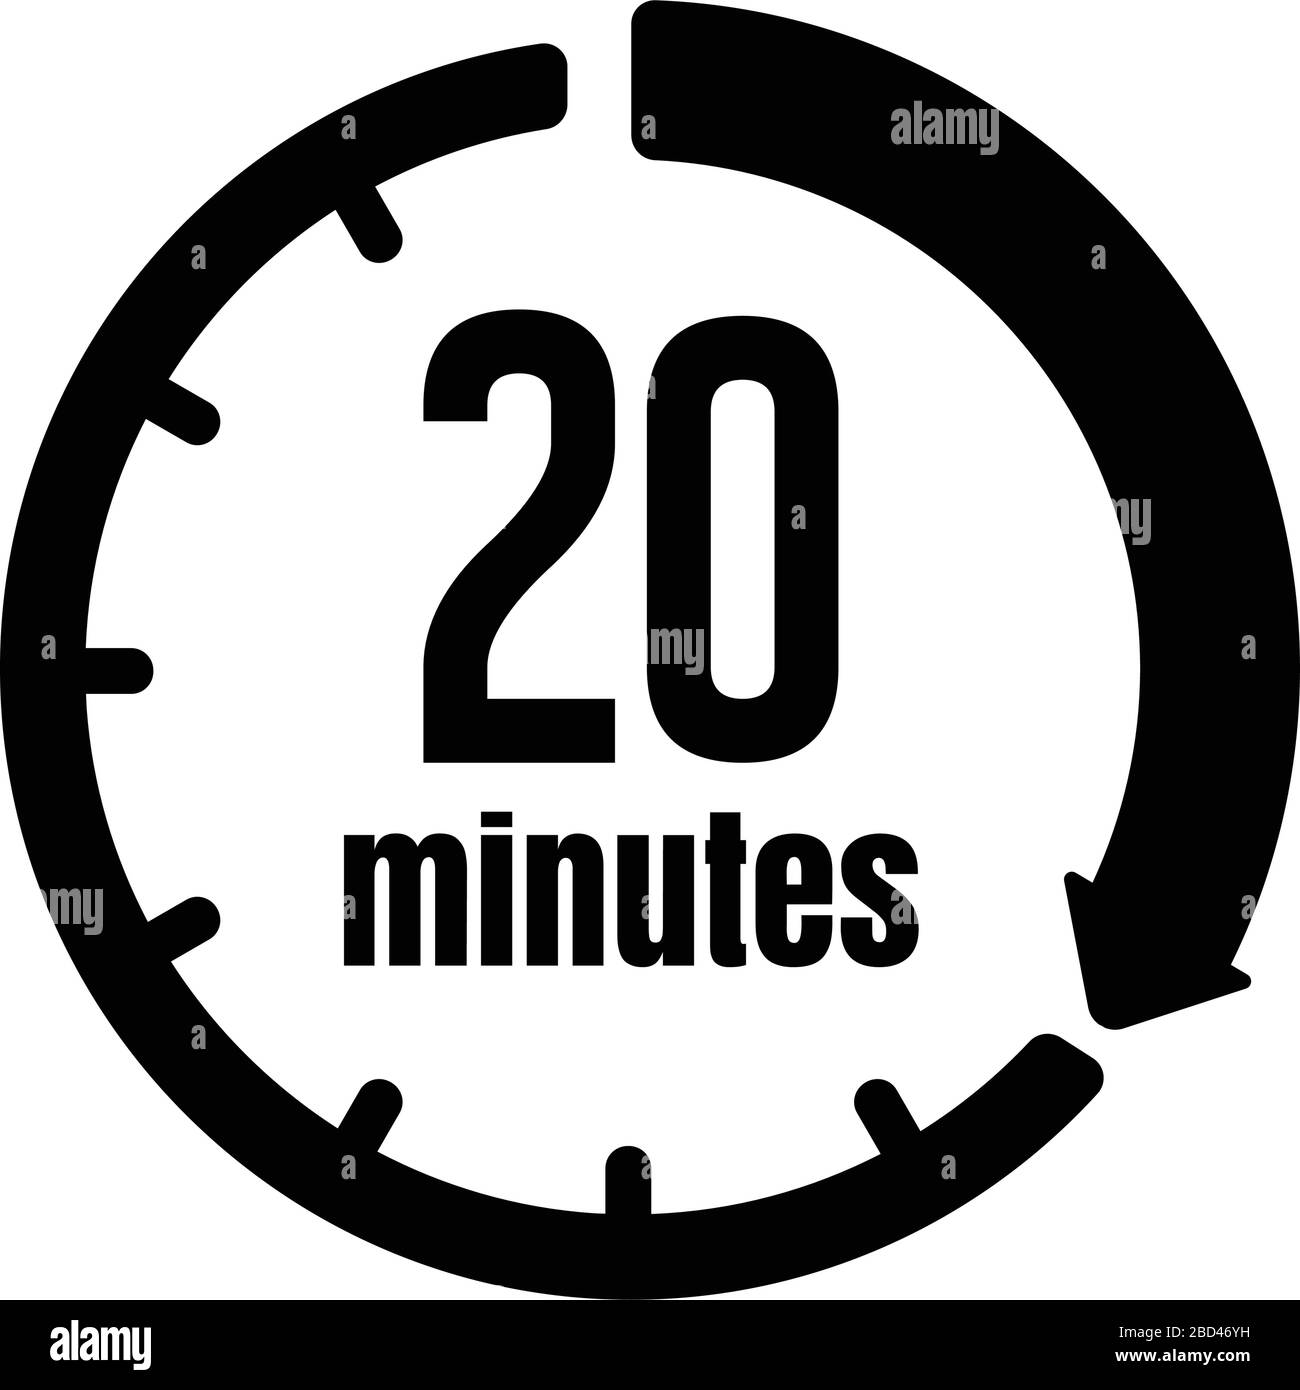 20 minute timer Black and White Stock Photos & Images - Alamy